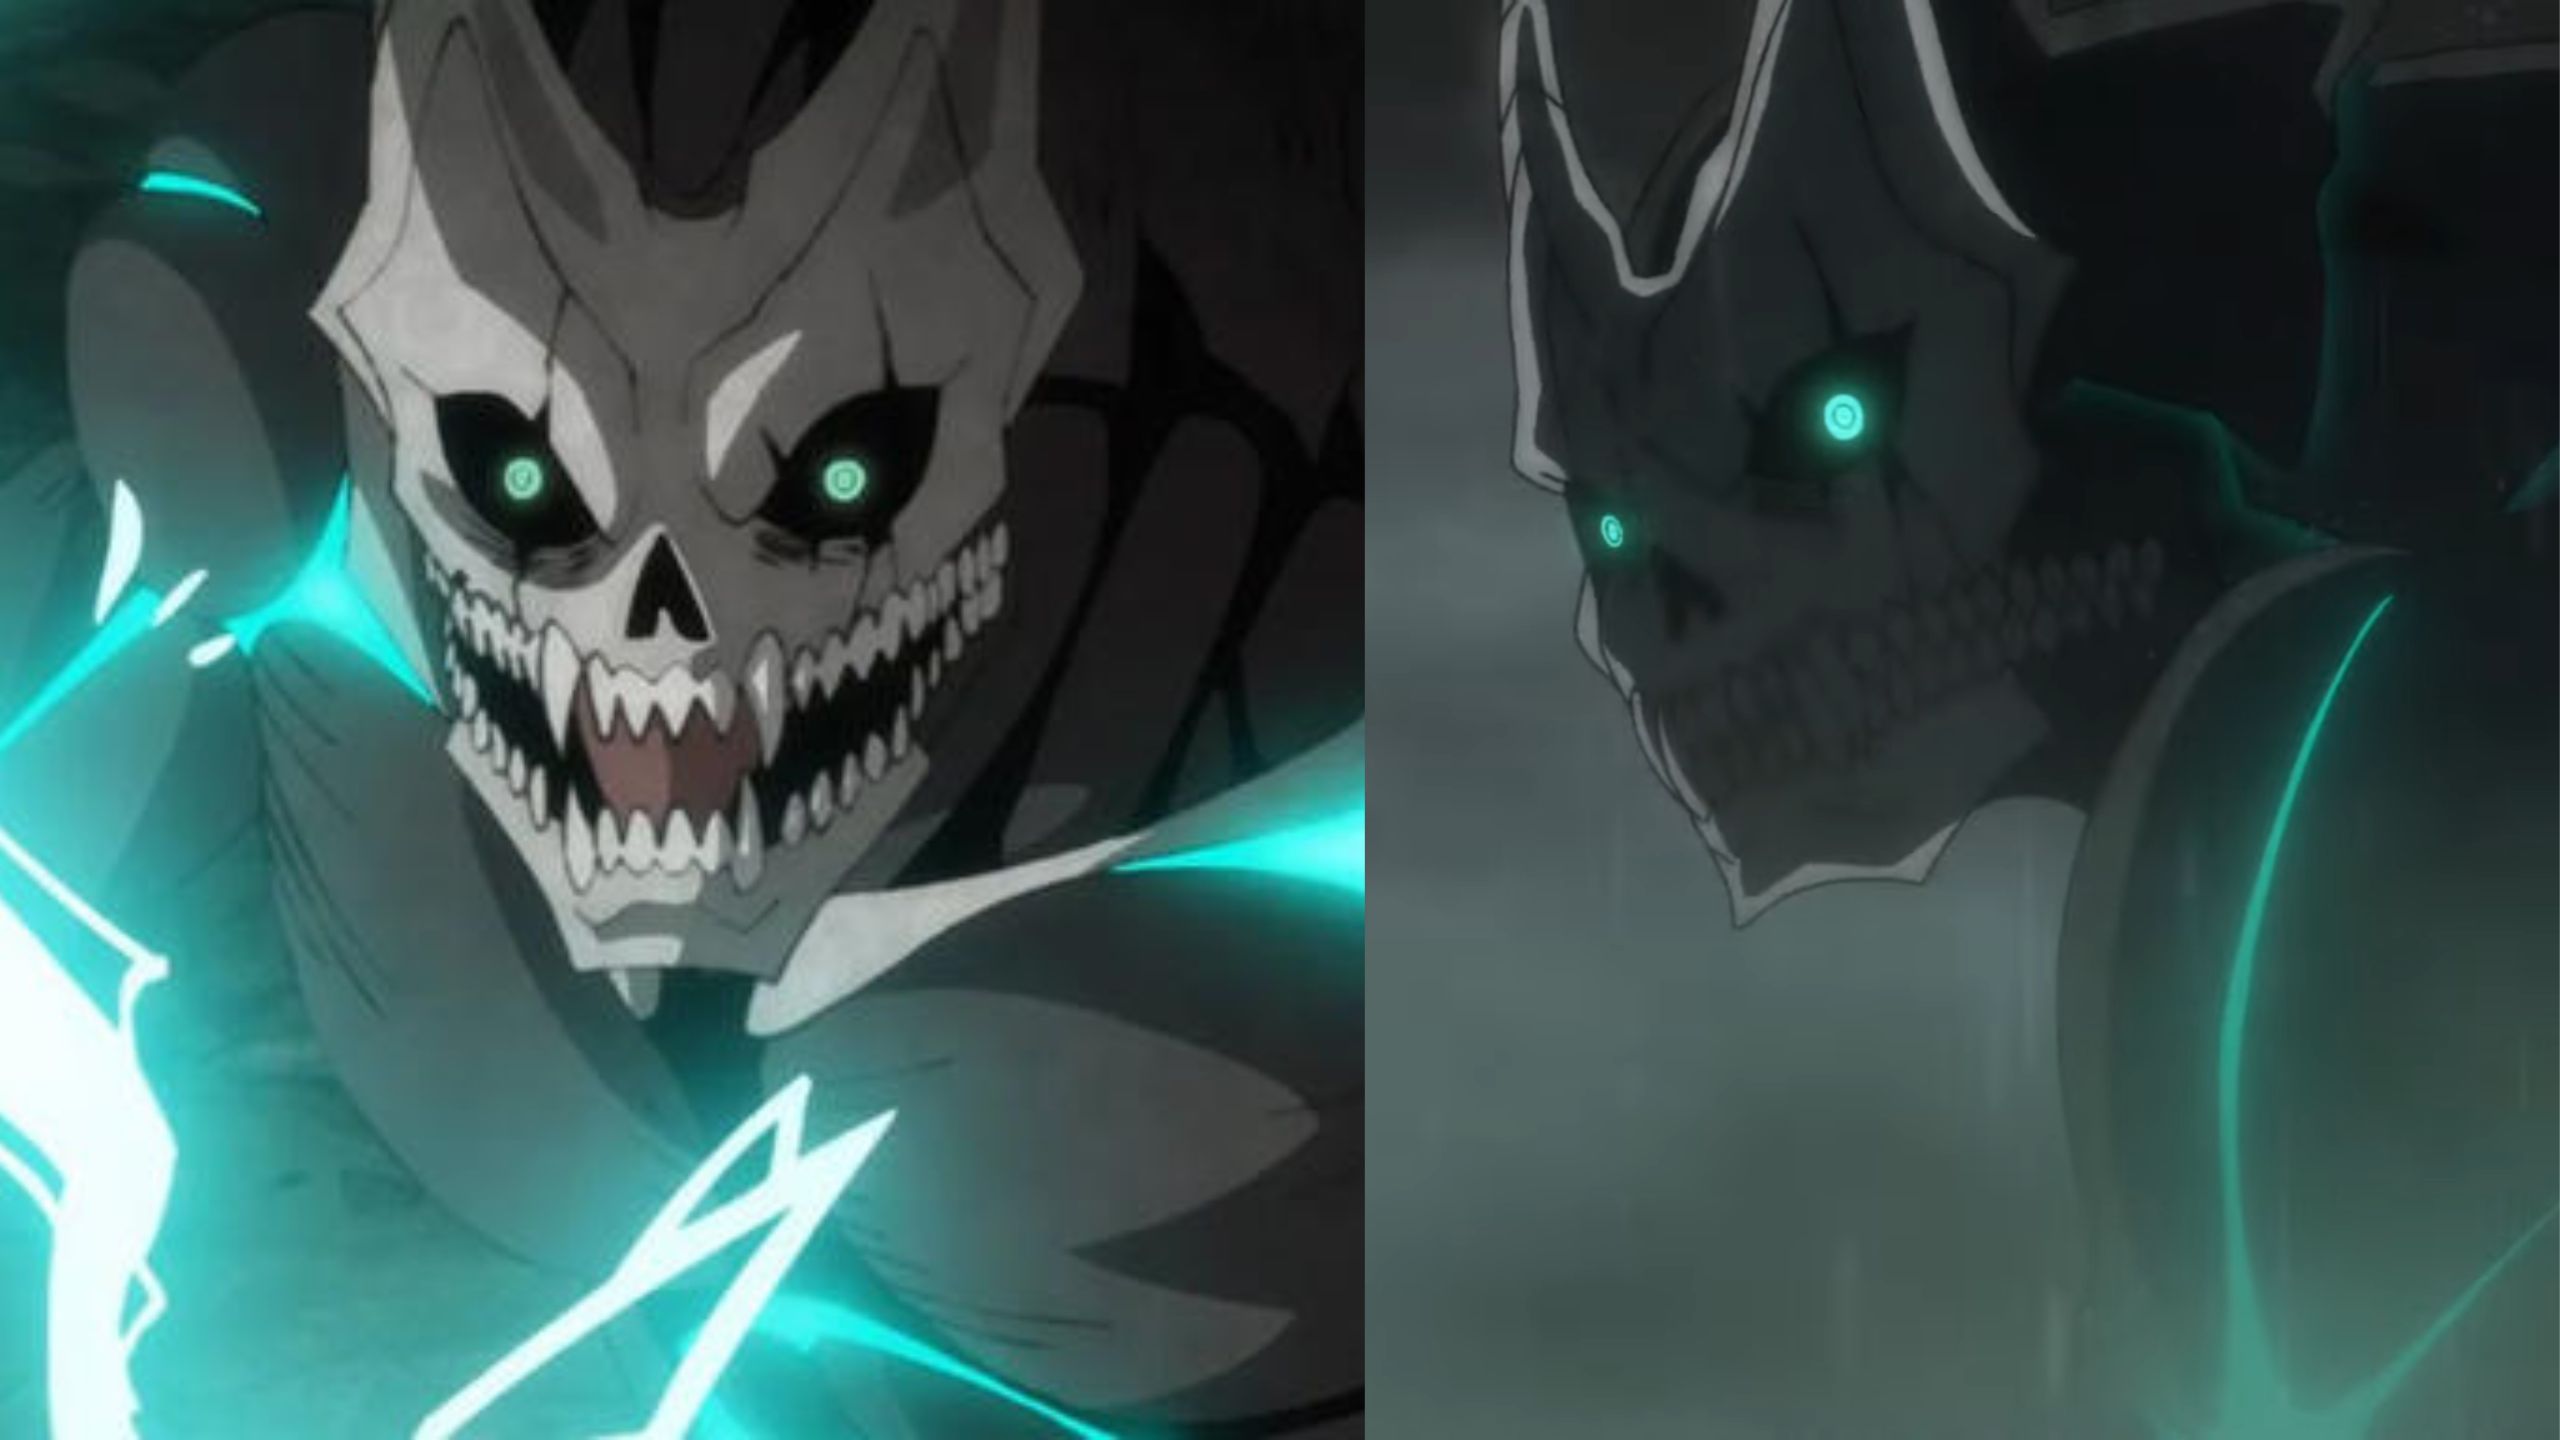 Kaiju No. 8 vs. Solo Leveling: Which Epic Anime Series Reigns Supreme Among Fans?